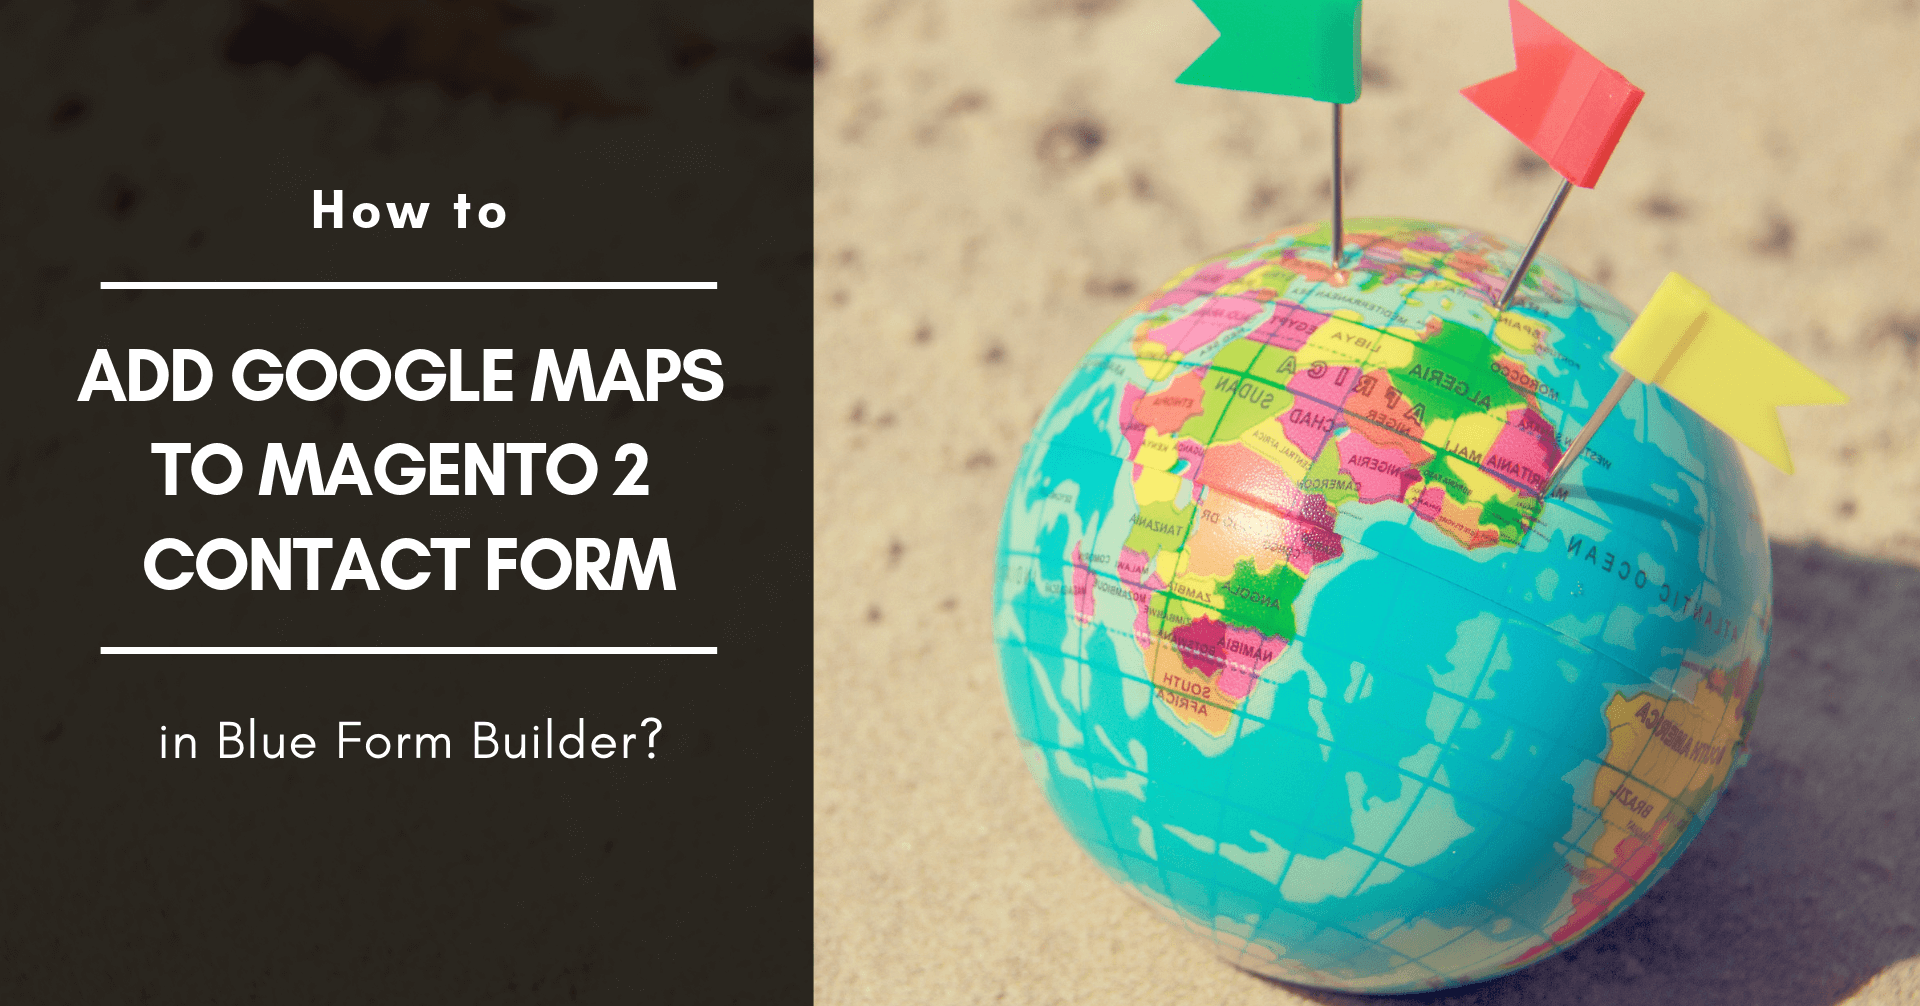 How to add Google Maps to Magento 2 contact form in Blue Form Builder?